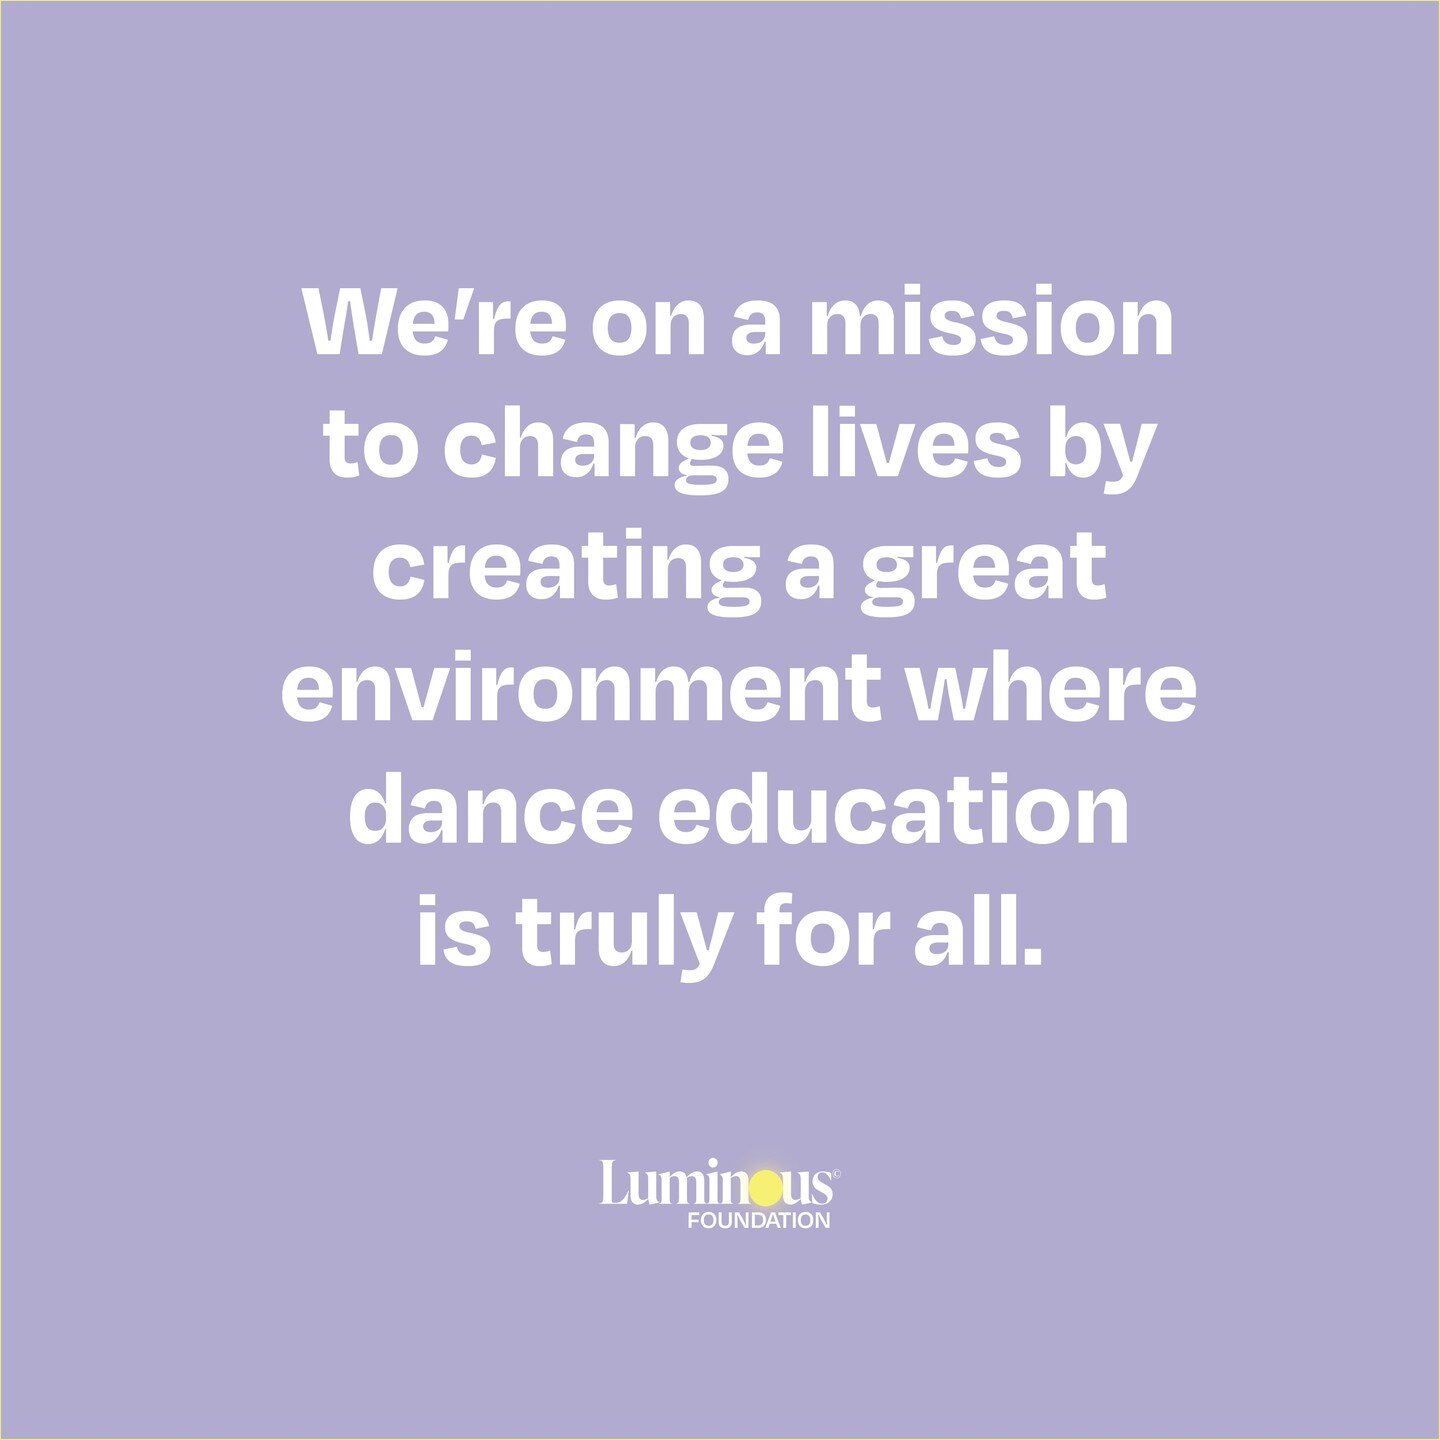 Everyone deserves access to great dance education.

Your contribution has a HUGE impact.

Donate or learn more at luminousfoundation.org